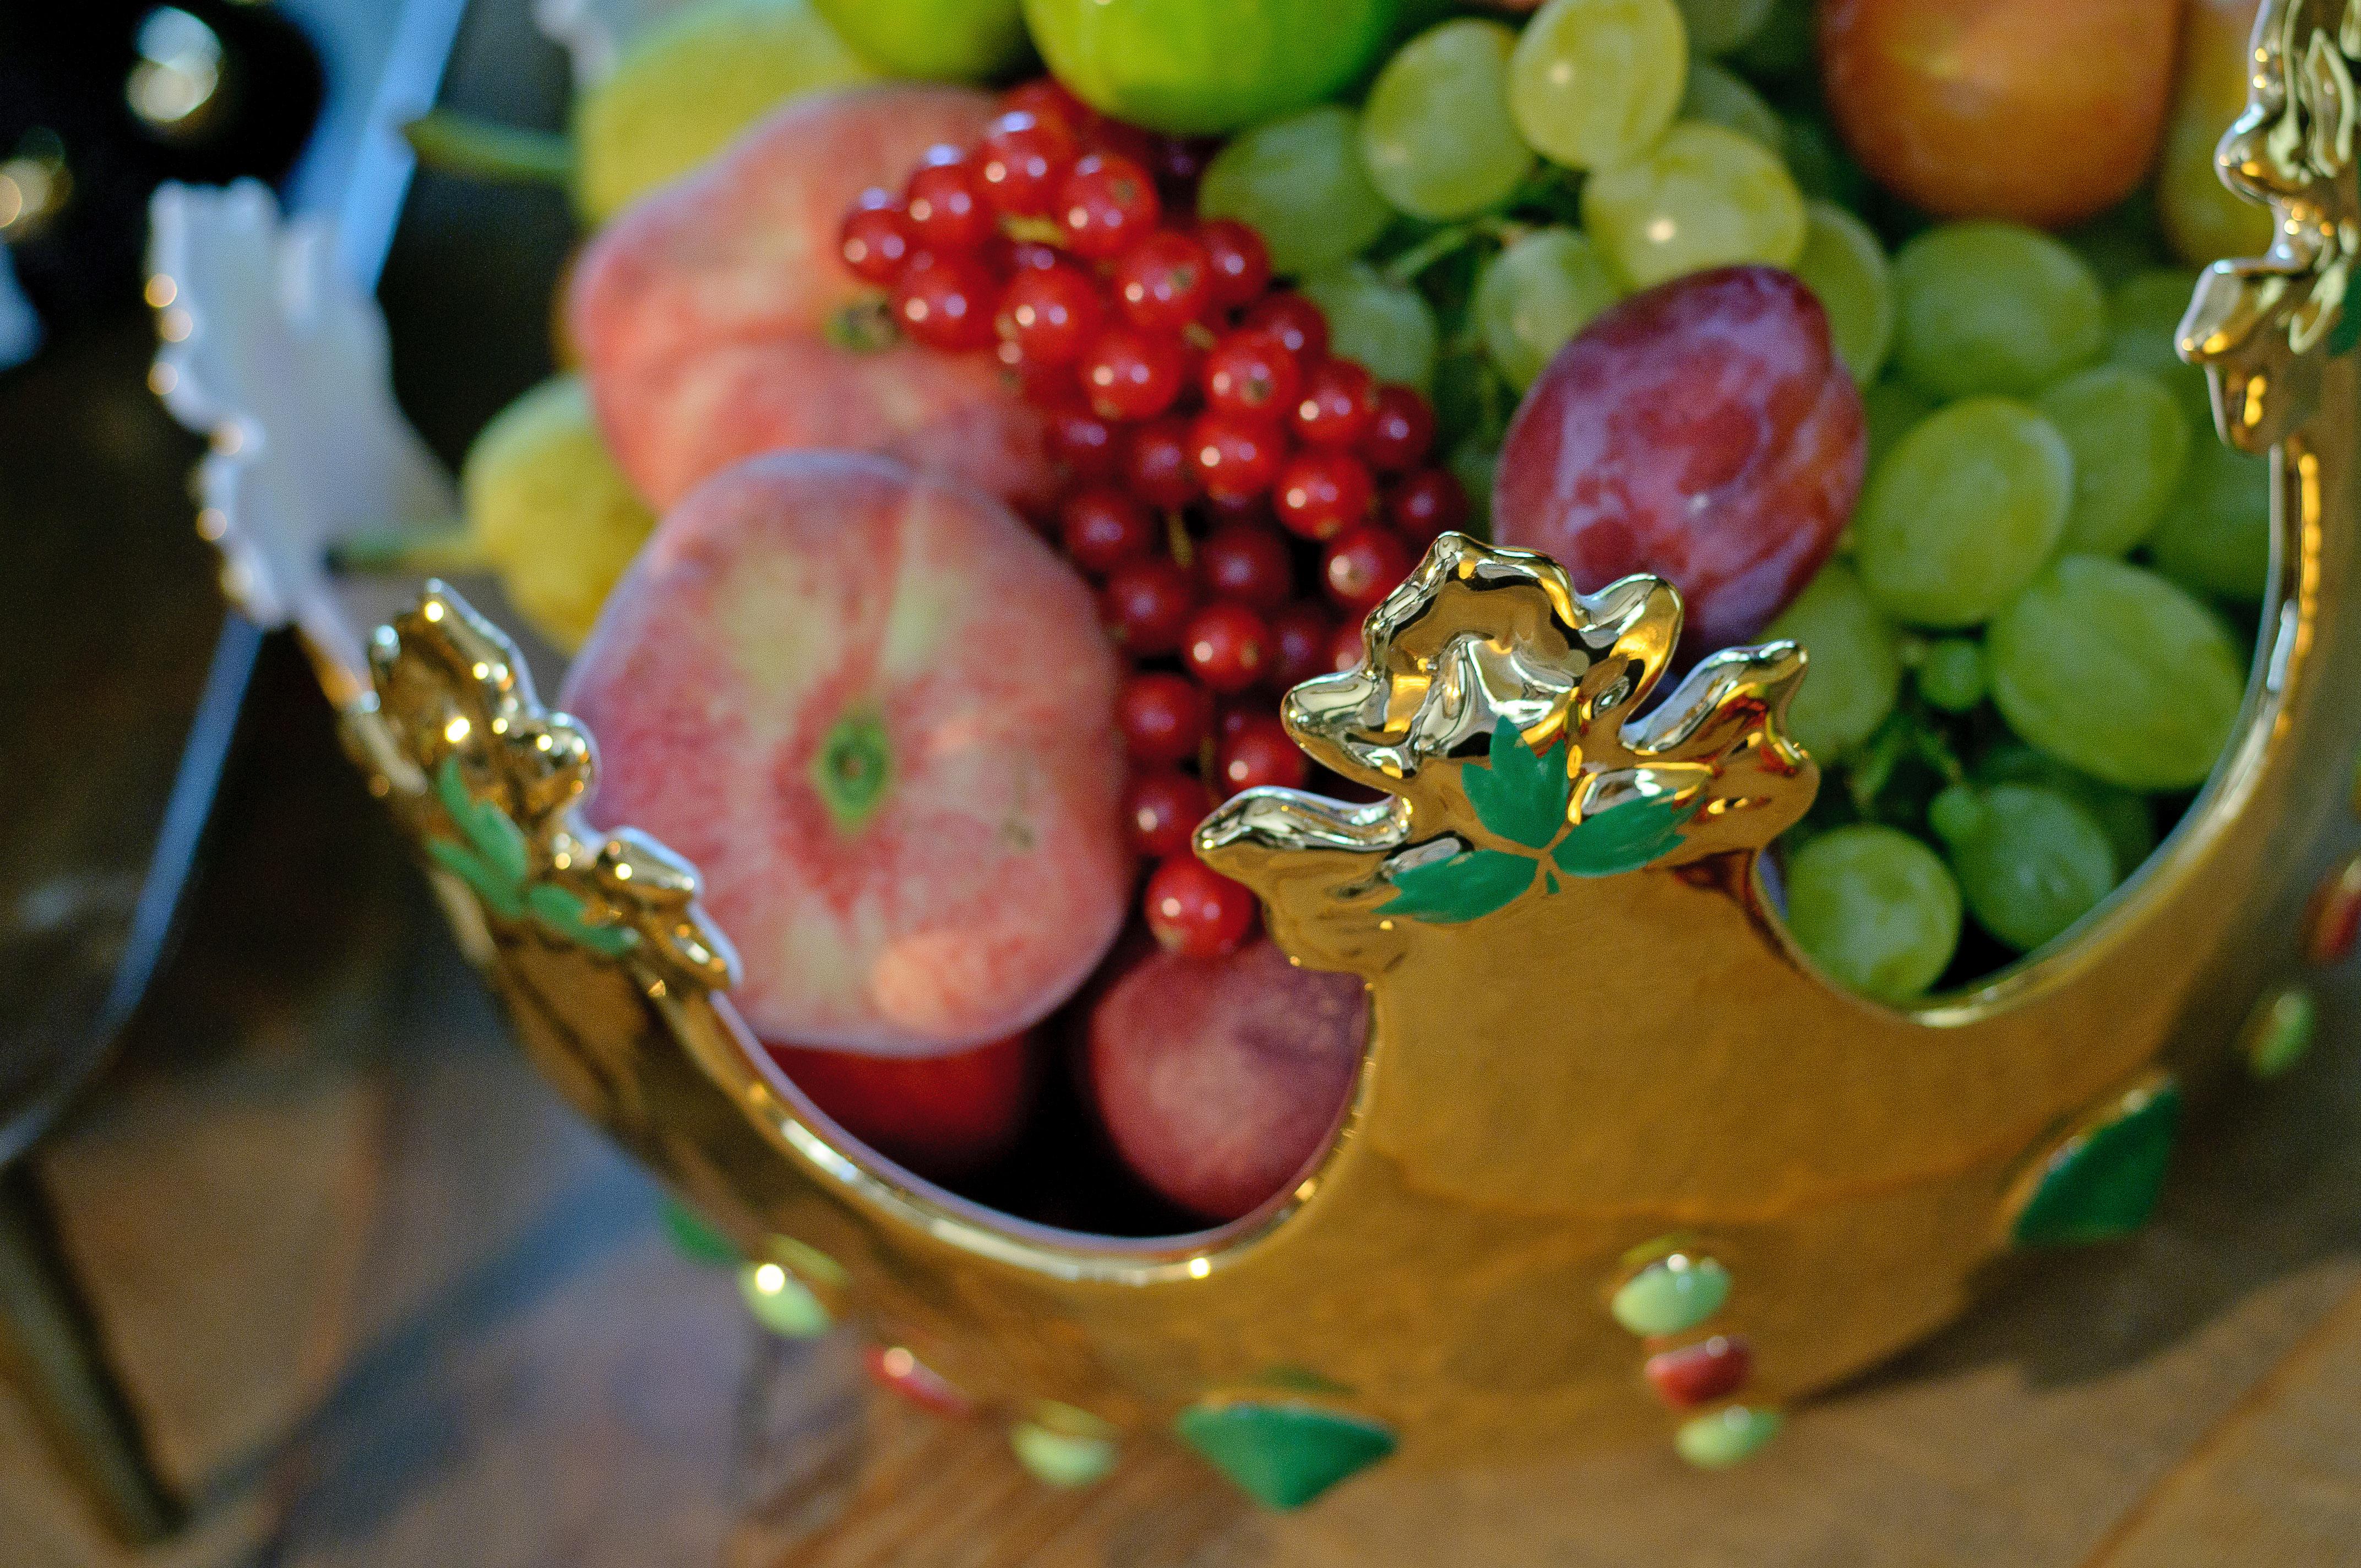 CORONA DIANA elegant cup or centrepiece, made on the lathe and hand painted. It can also be a precious fruit holder. Inside the crown is enamelled in white with multicolored mother-of-pearl reflections, while outside it is completely painted in pure